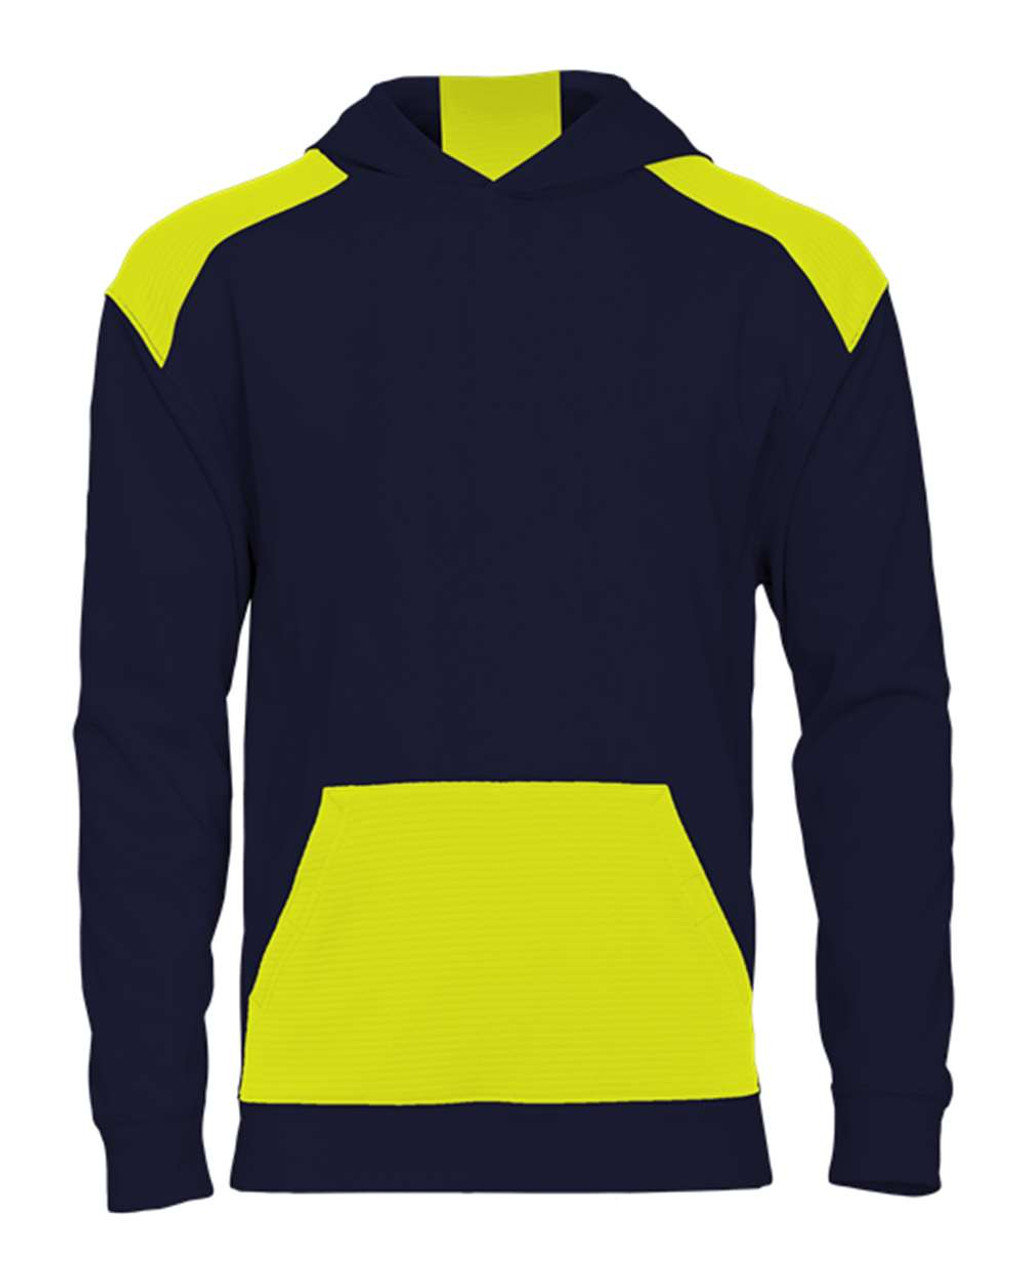 Navy/ Safety Yellow